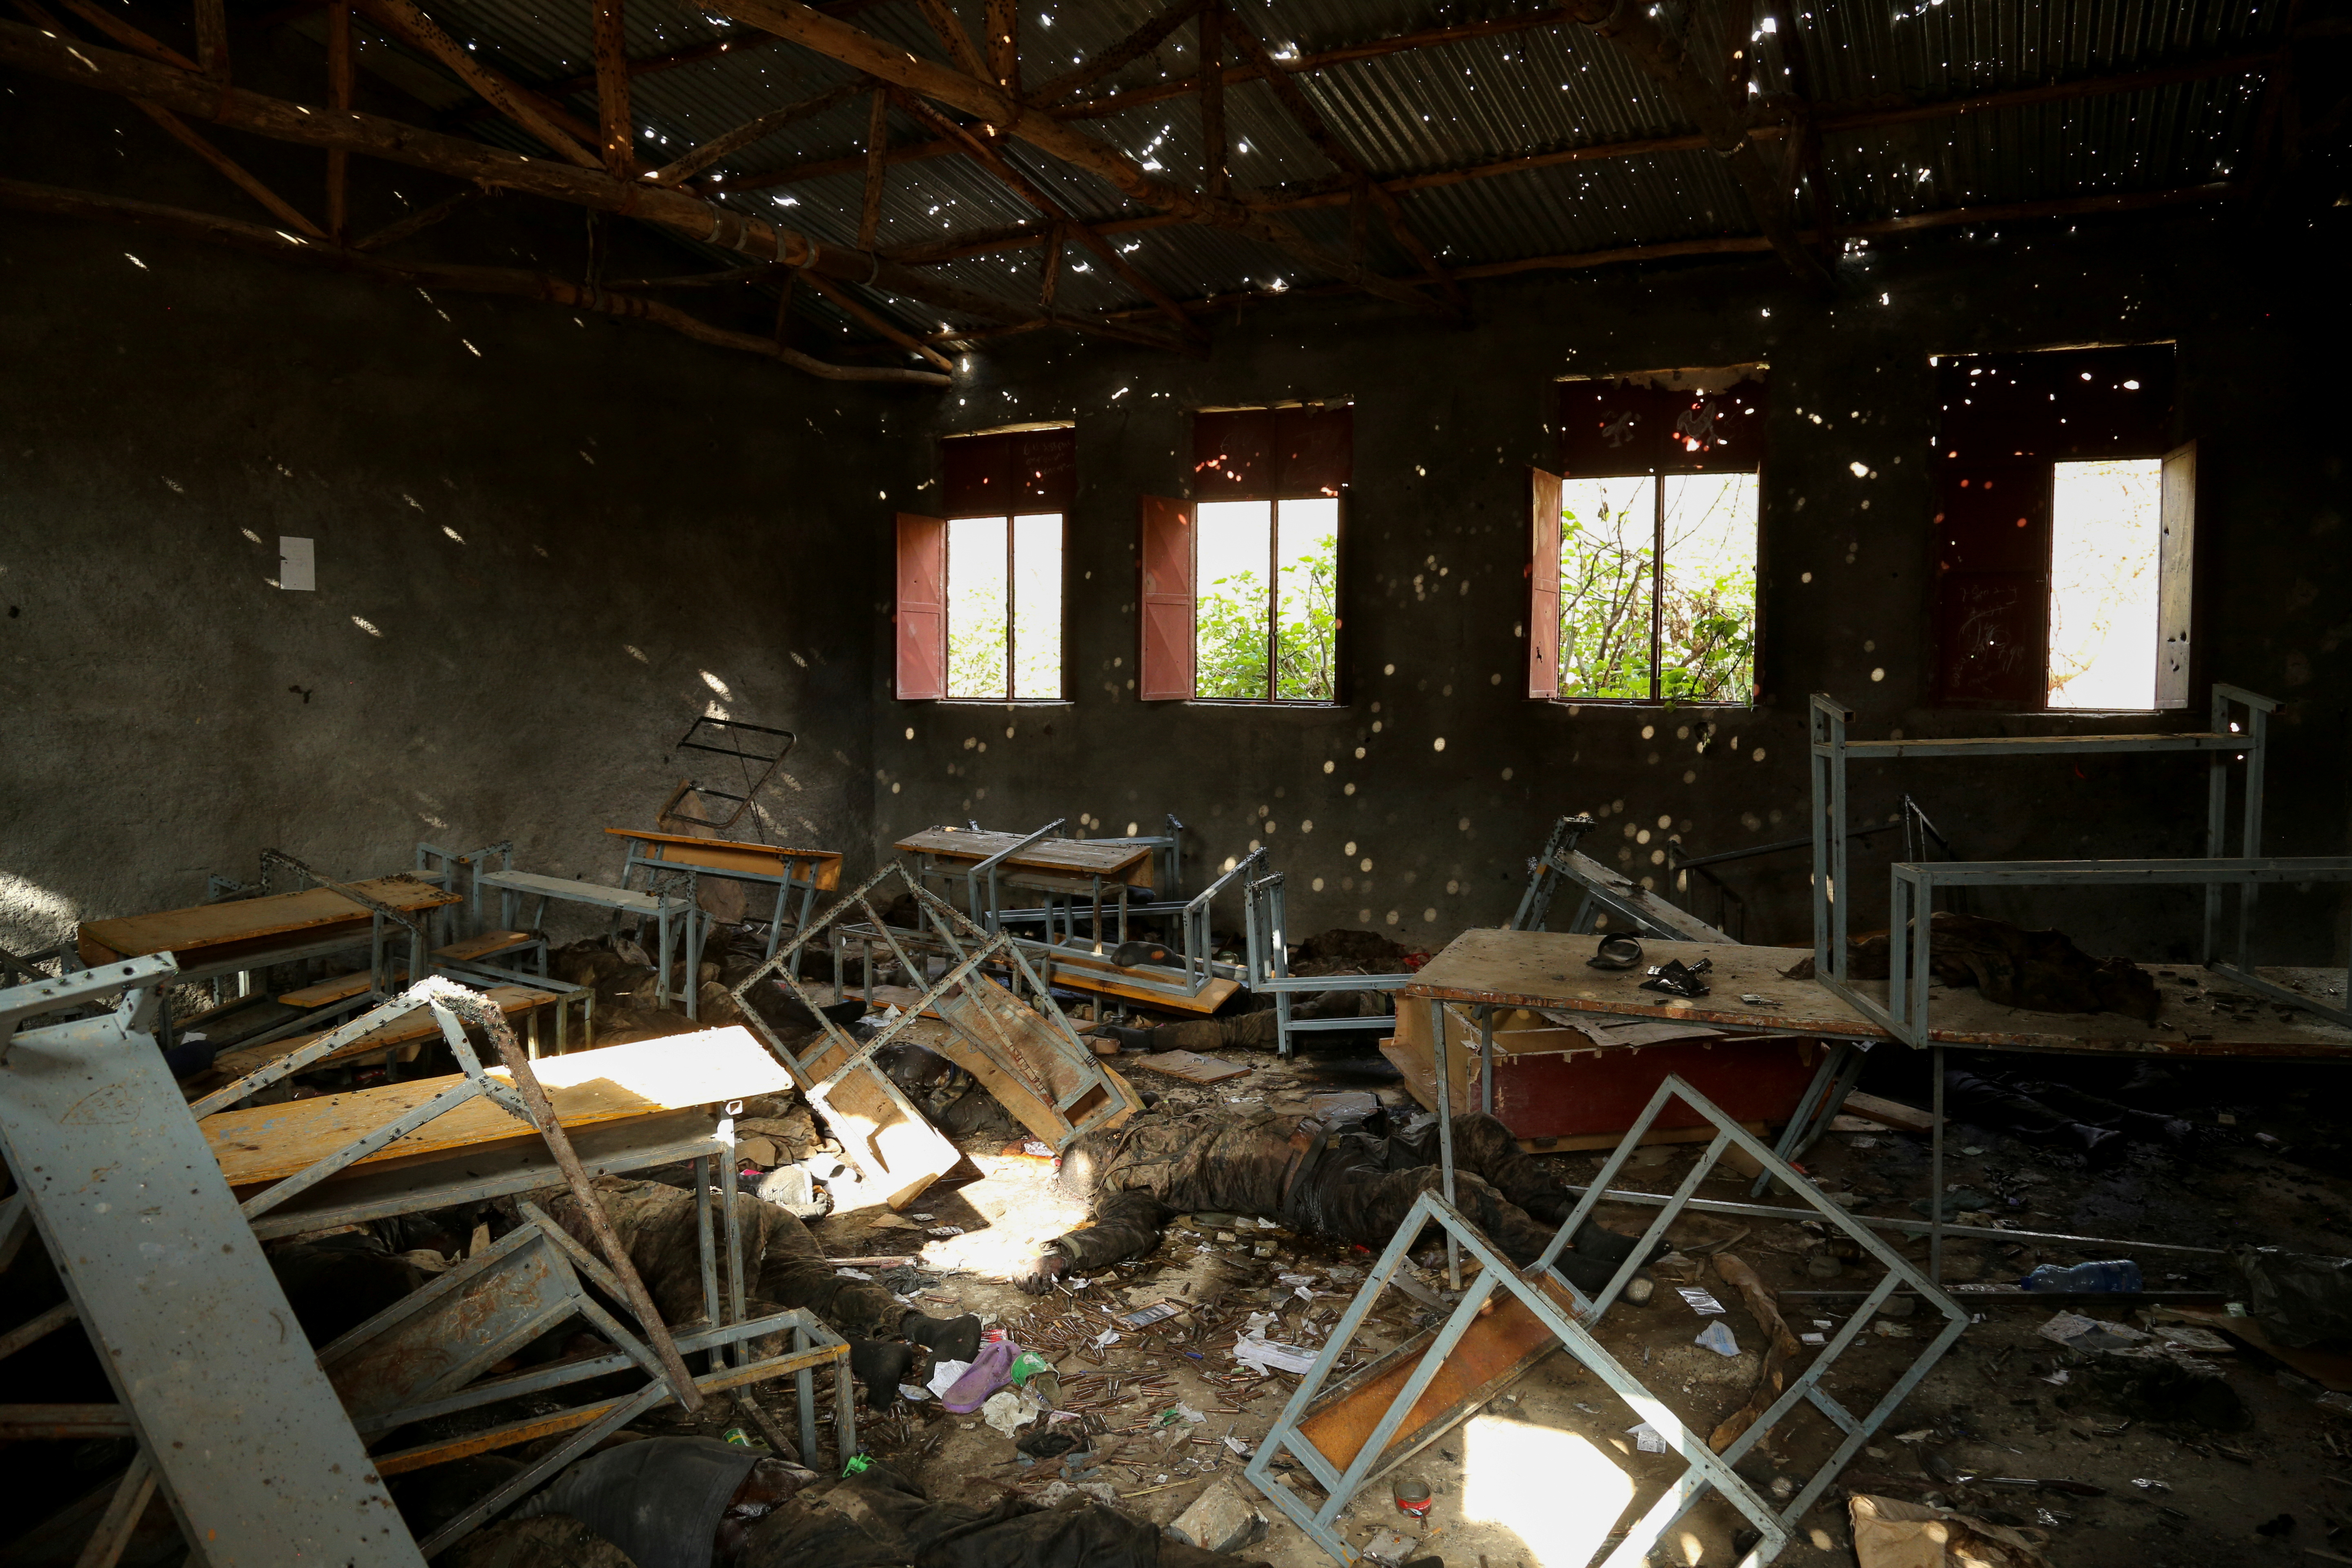  Light filters through the bullet-ridden roof of a classroom where the bodies of at least 27 dead soldiers from Ethiopia's military are lying in the village of Sheweate Hugum in south-central Tigray, Ethiopia, July 10, 2021. REUTERS/Giulia Paravicini/File Photo